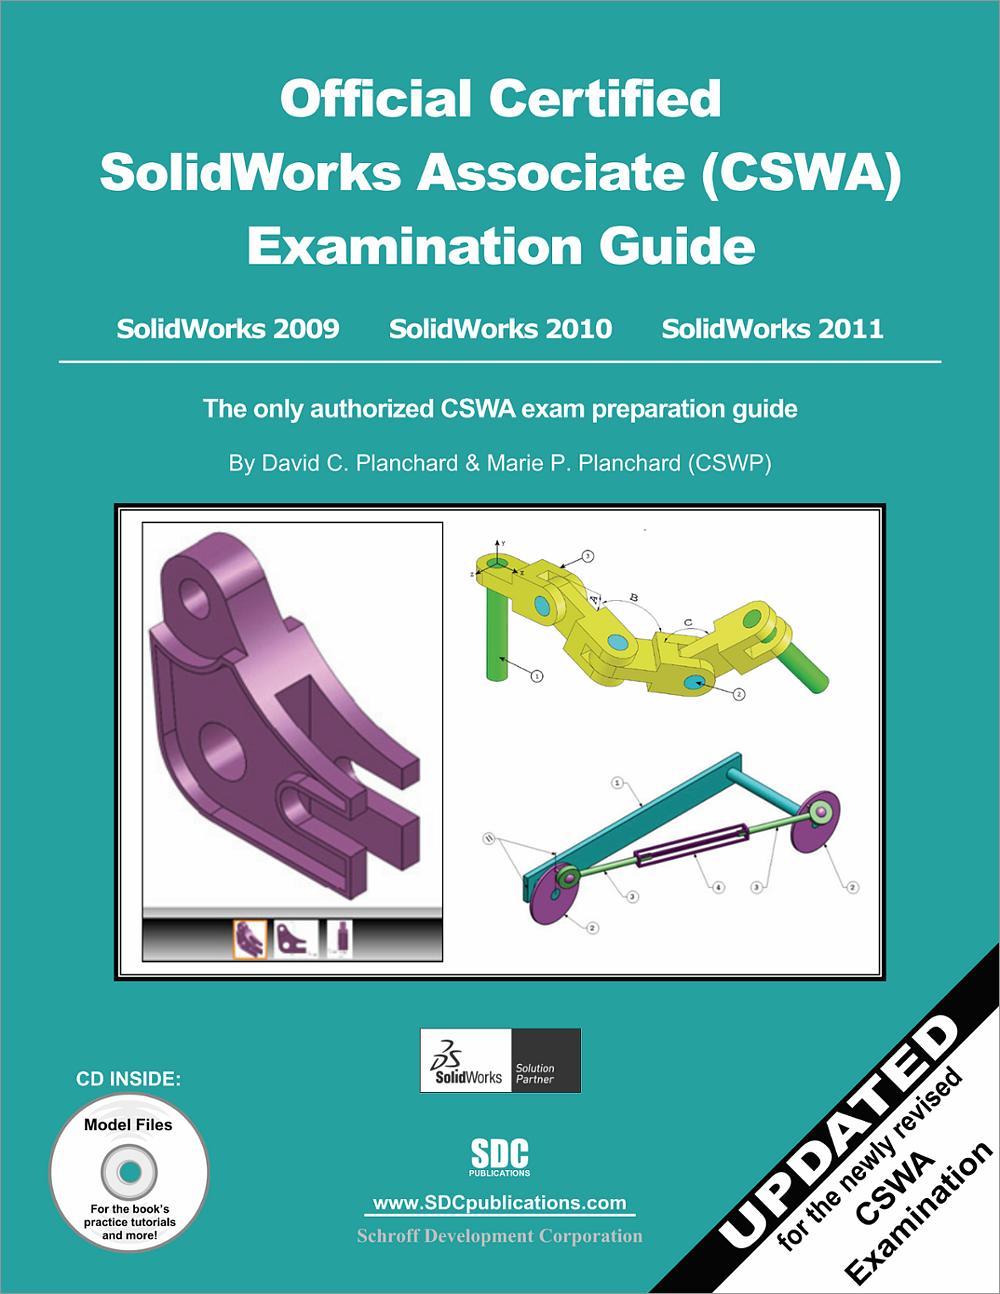 how to put solidworks certification on resume